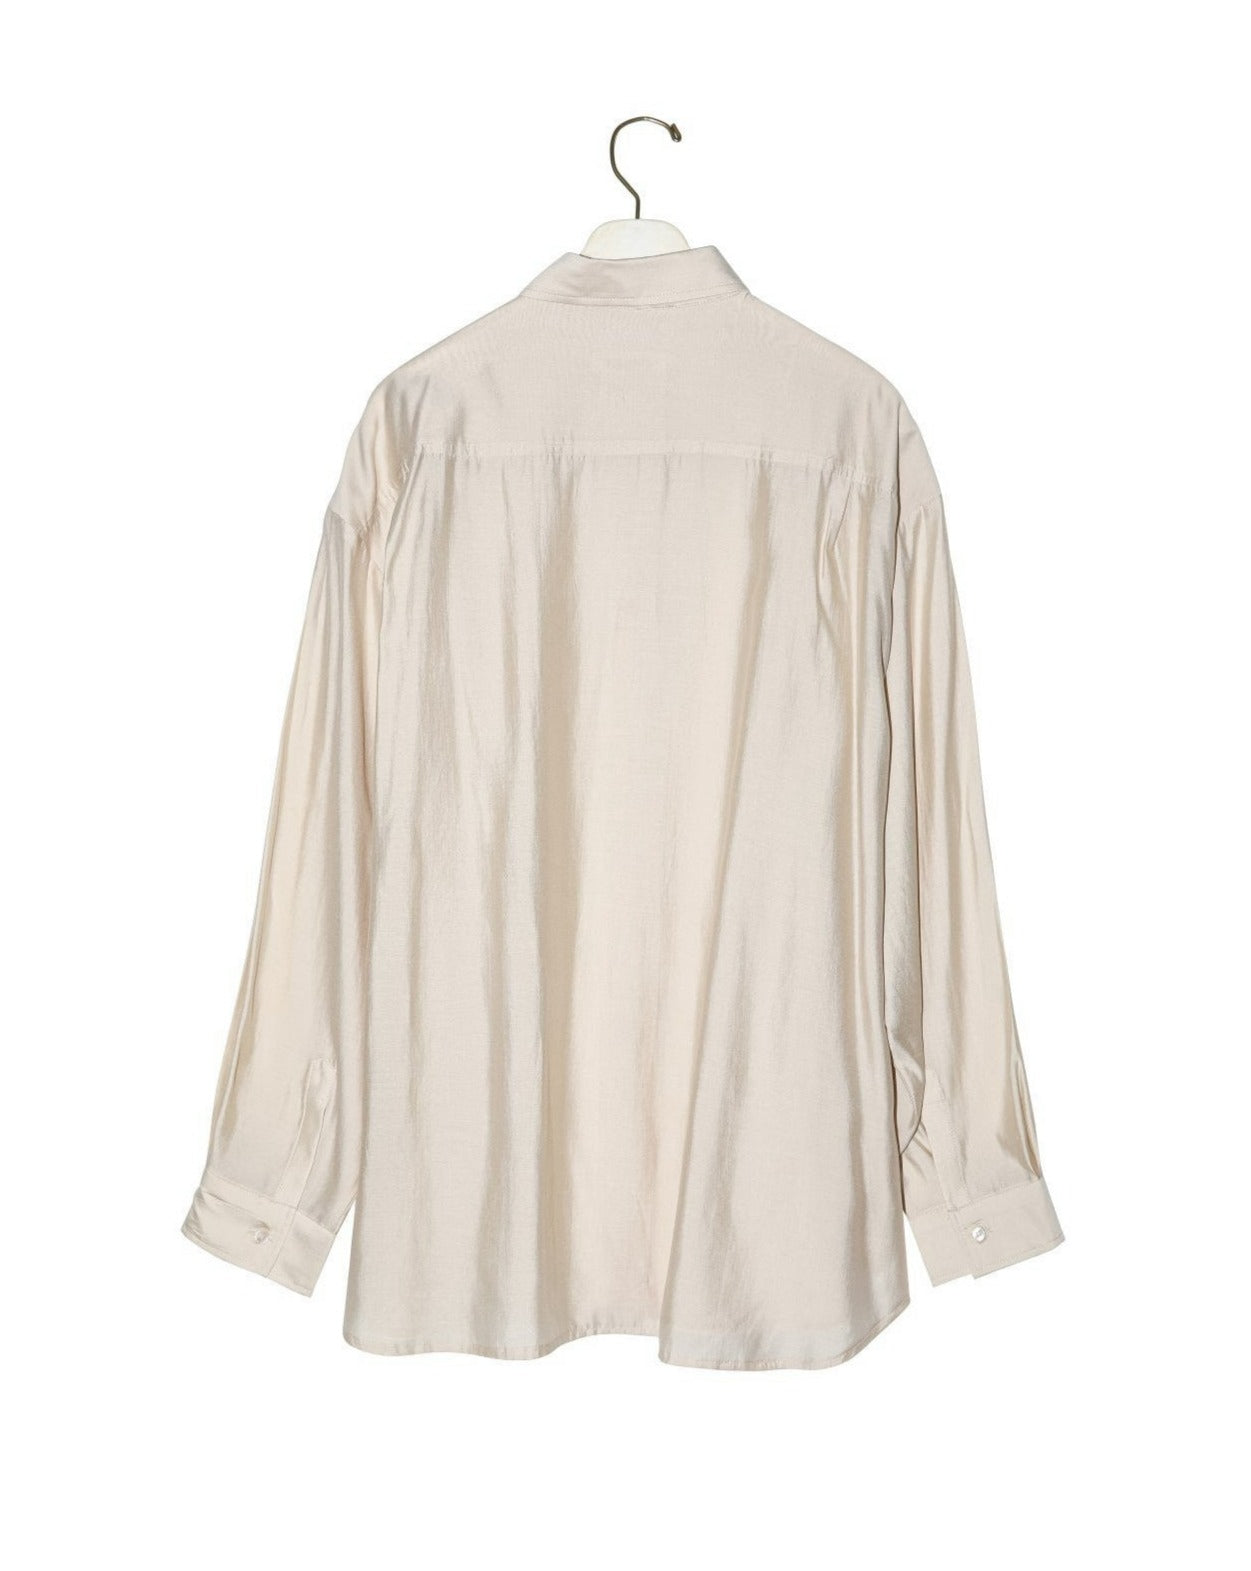 【PAPERMOON ペーパームーン】SS / Sheer Silky Classic Button Down Shirt